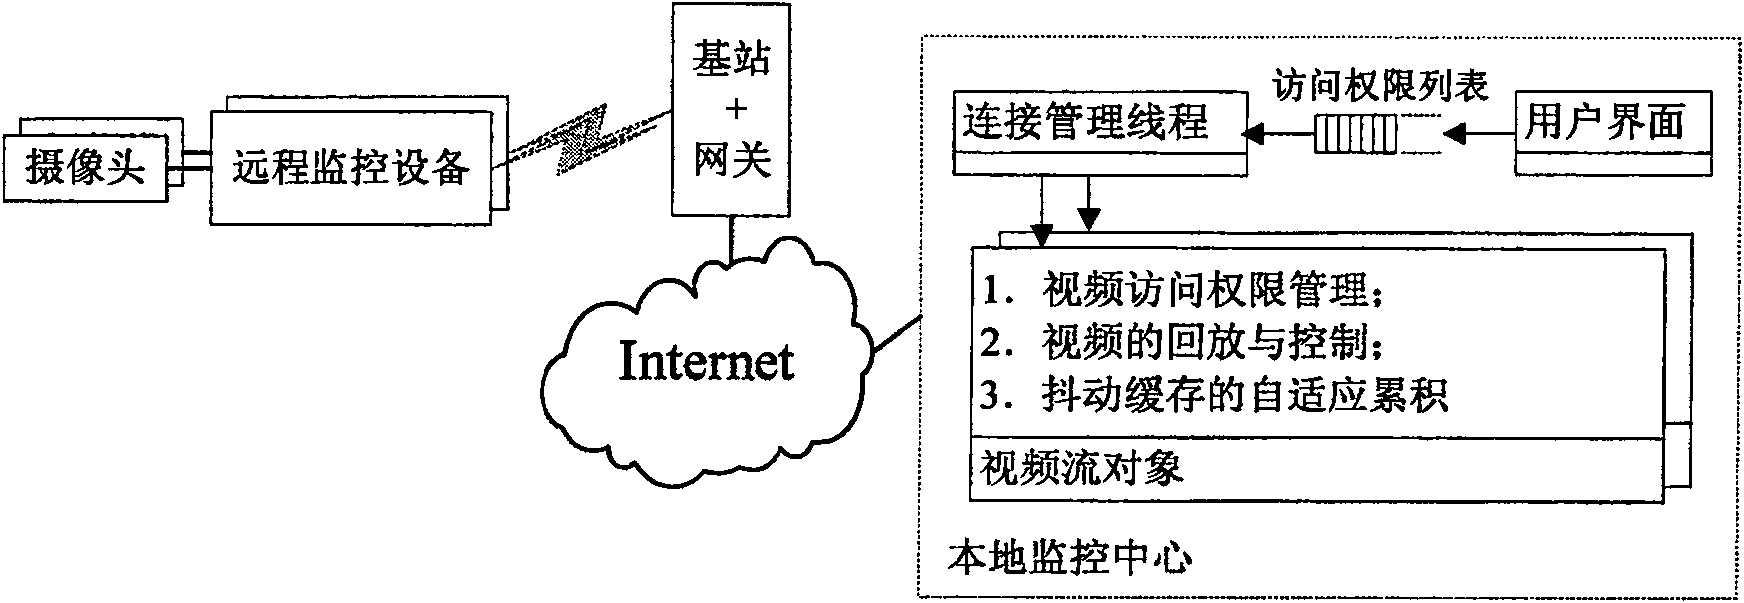 Apparatus for unified monitoring multi-path remote video